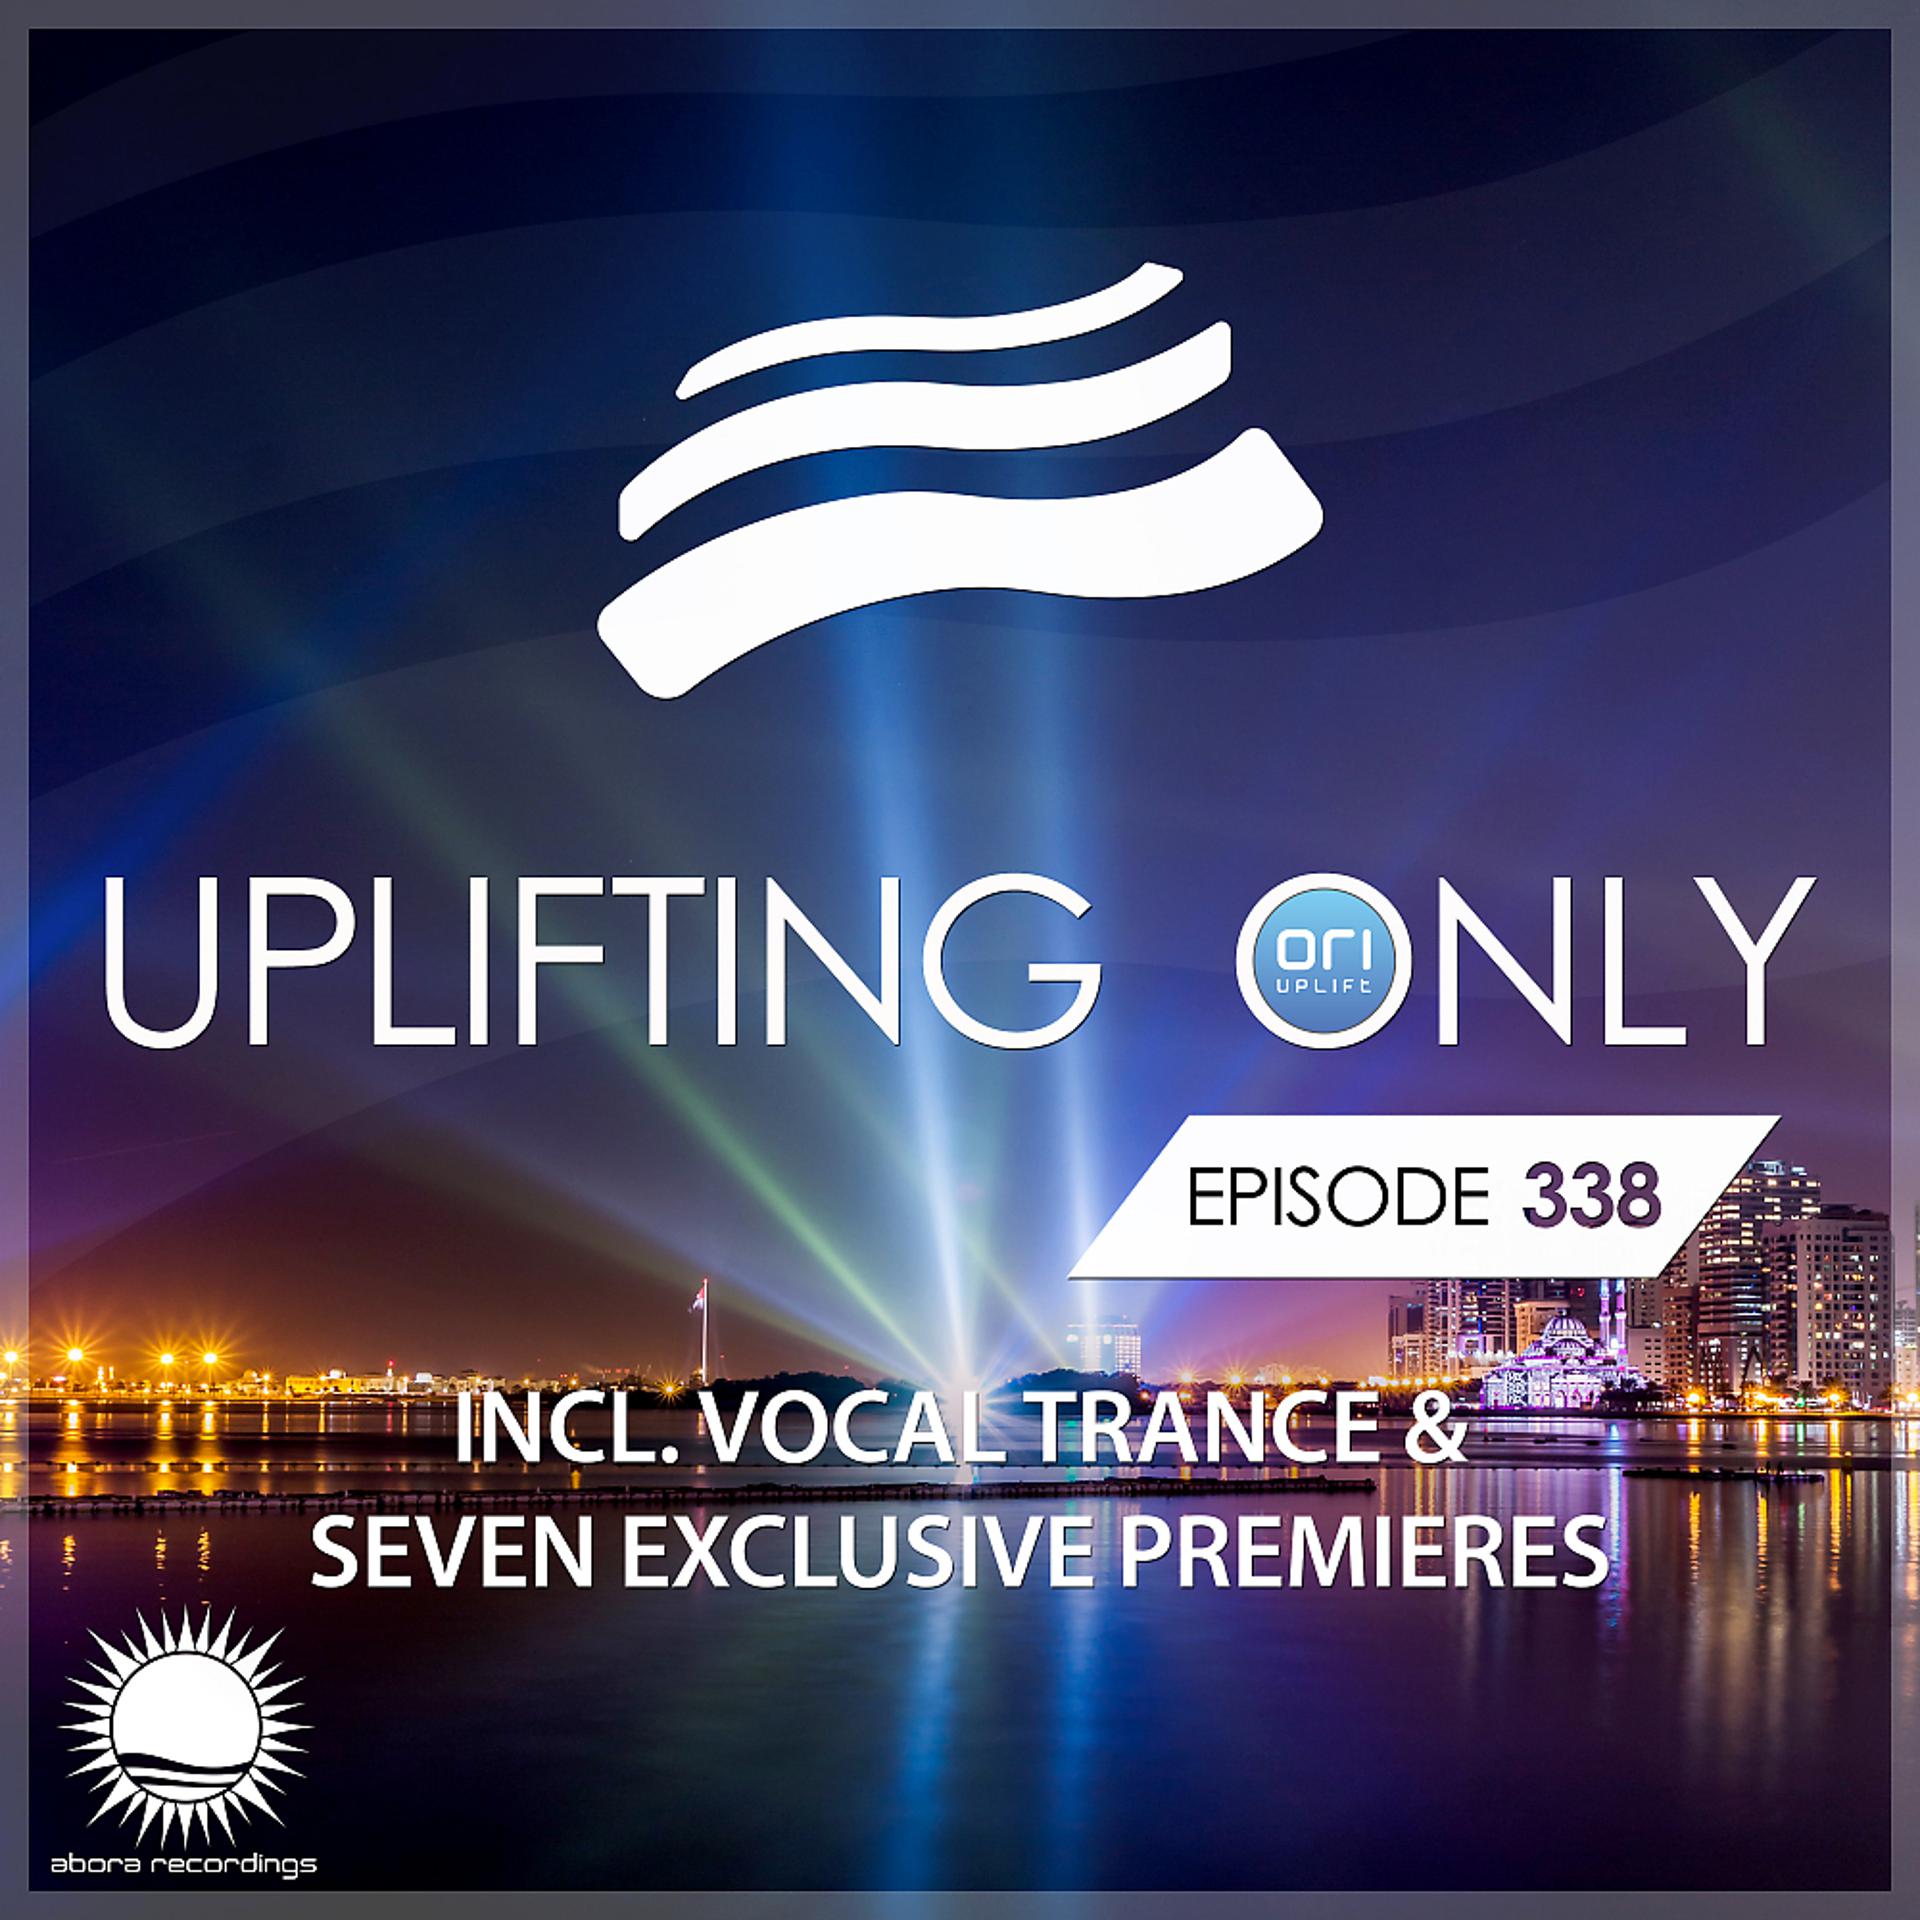 Постер альбома Uplifting Only Episode 338 (incl. Vocal Trance)